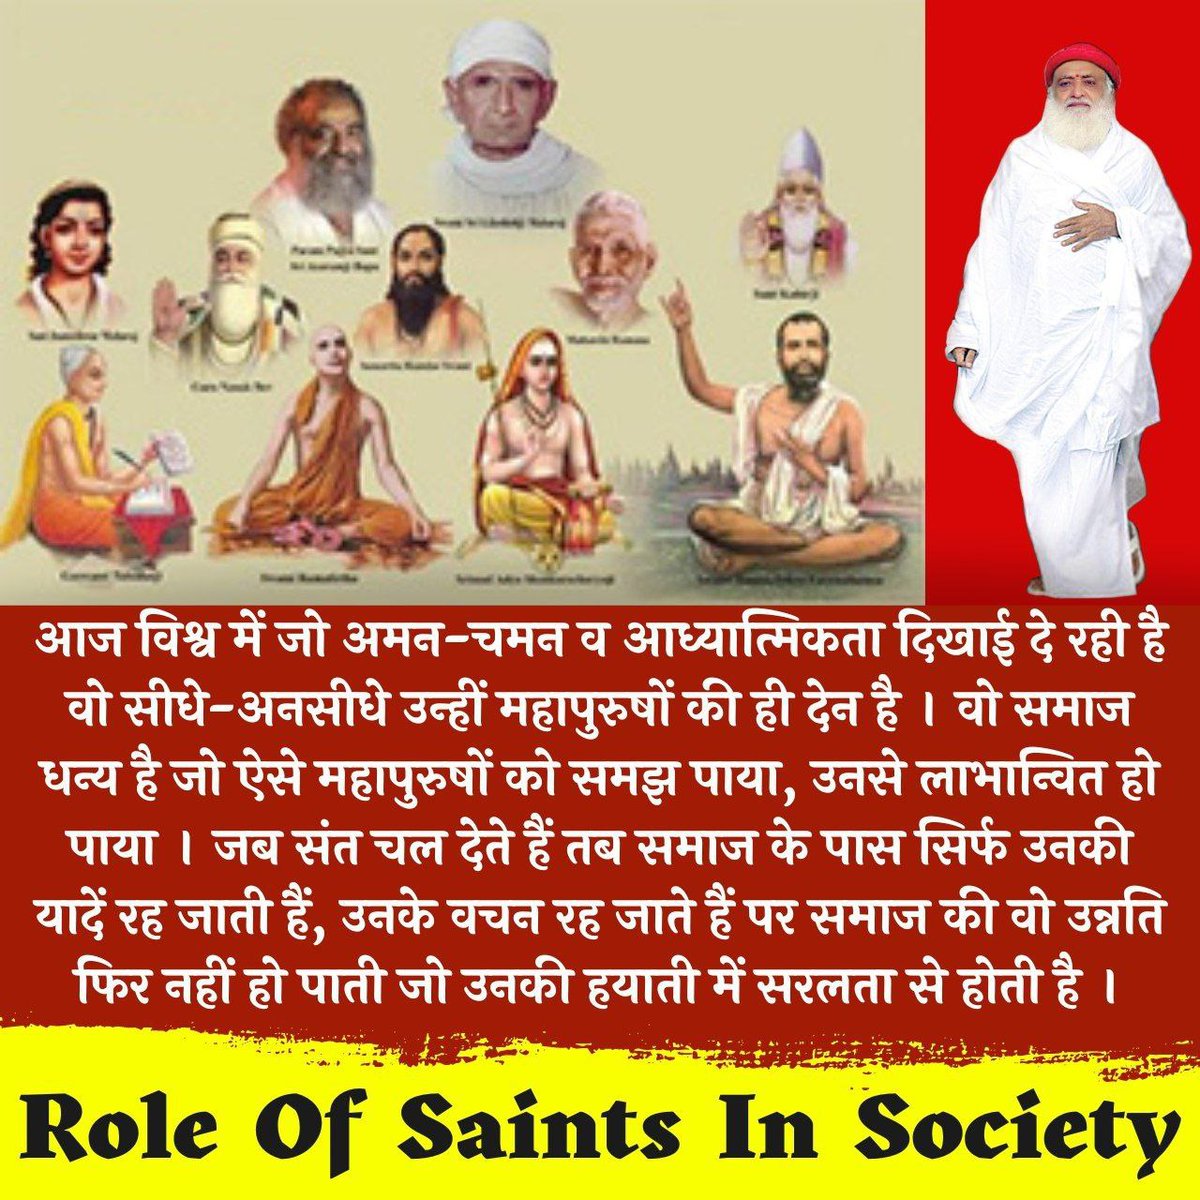 Since ancient times, saints have protected our culture, but the irony is that saints like Sant Shri Asharamji Bapu, who dedicated their entire lives to protect the culture and Sanatan Dharma ,are being subjected to extreme atrocities today.
Jaago Hindu .. #संत_हैं_तो_संस्कृति_है